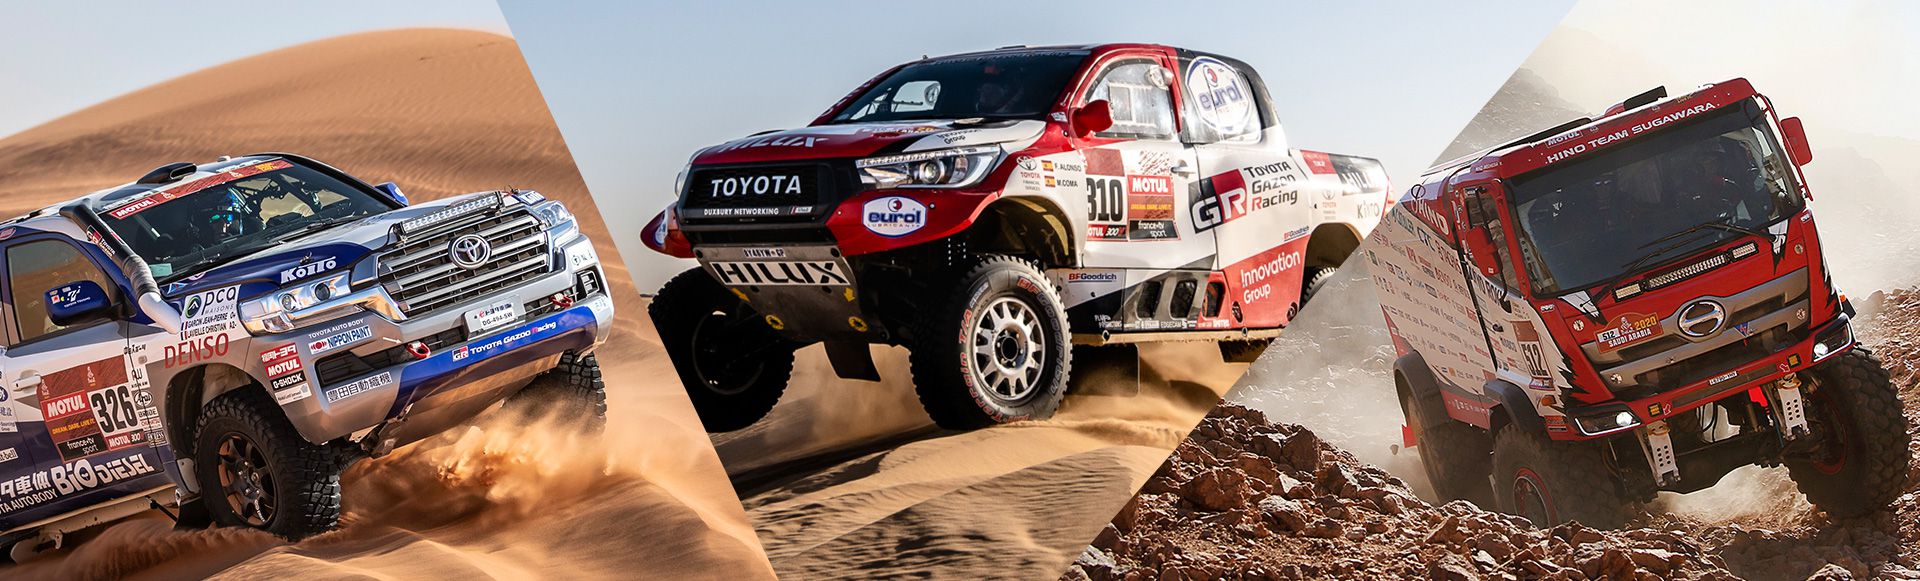 Comment From President Akio Toyoda Concerning The Outcome Of The Dakar Rally Toyota Global Newsroom Toyota Motor Corporation Official Global Website